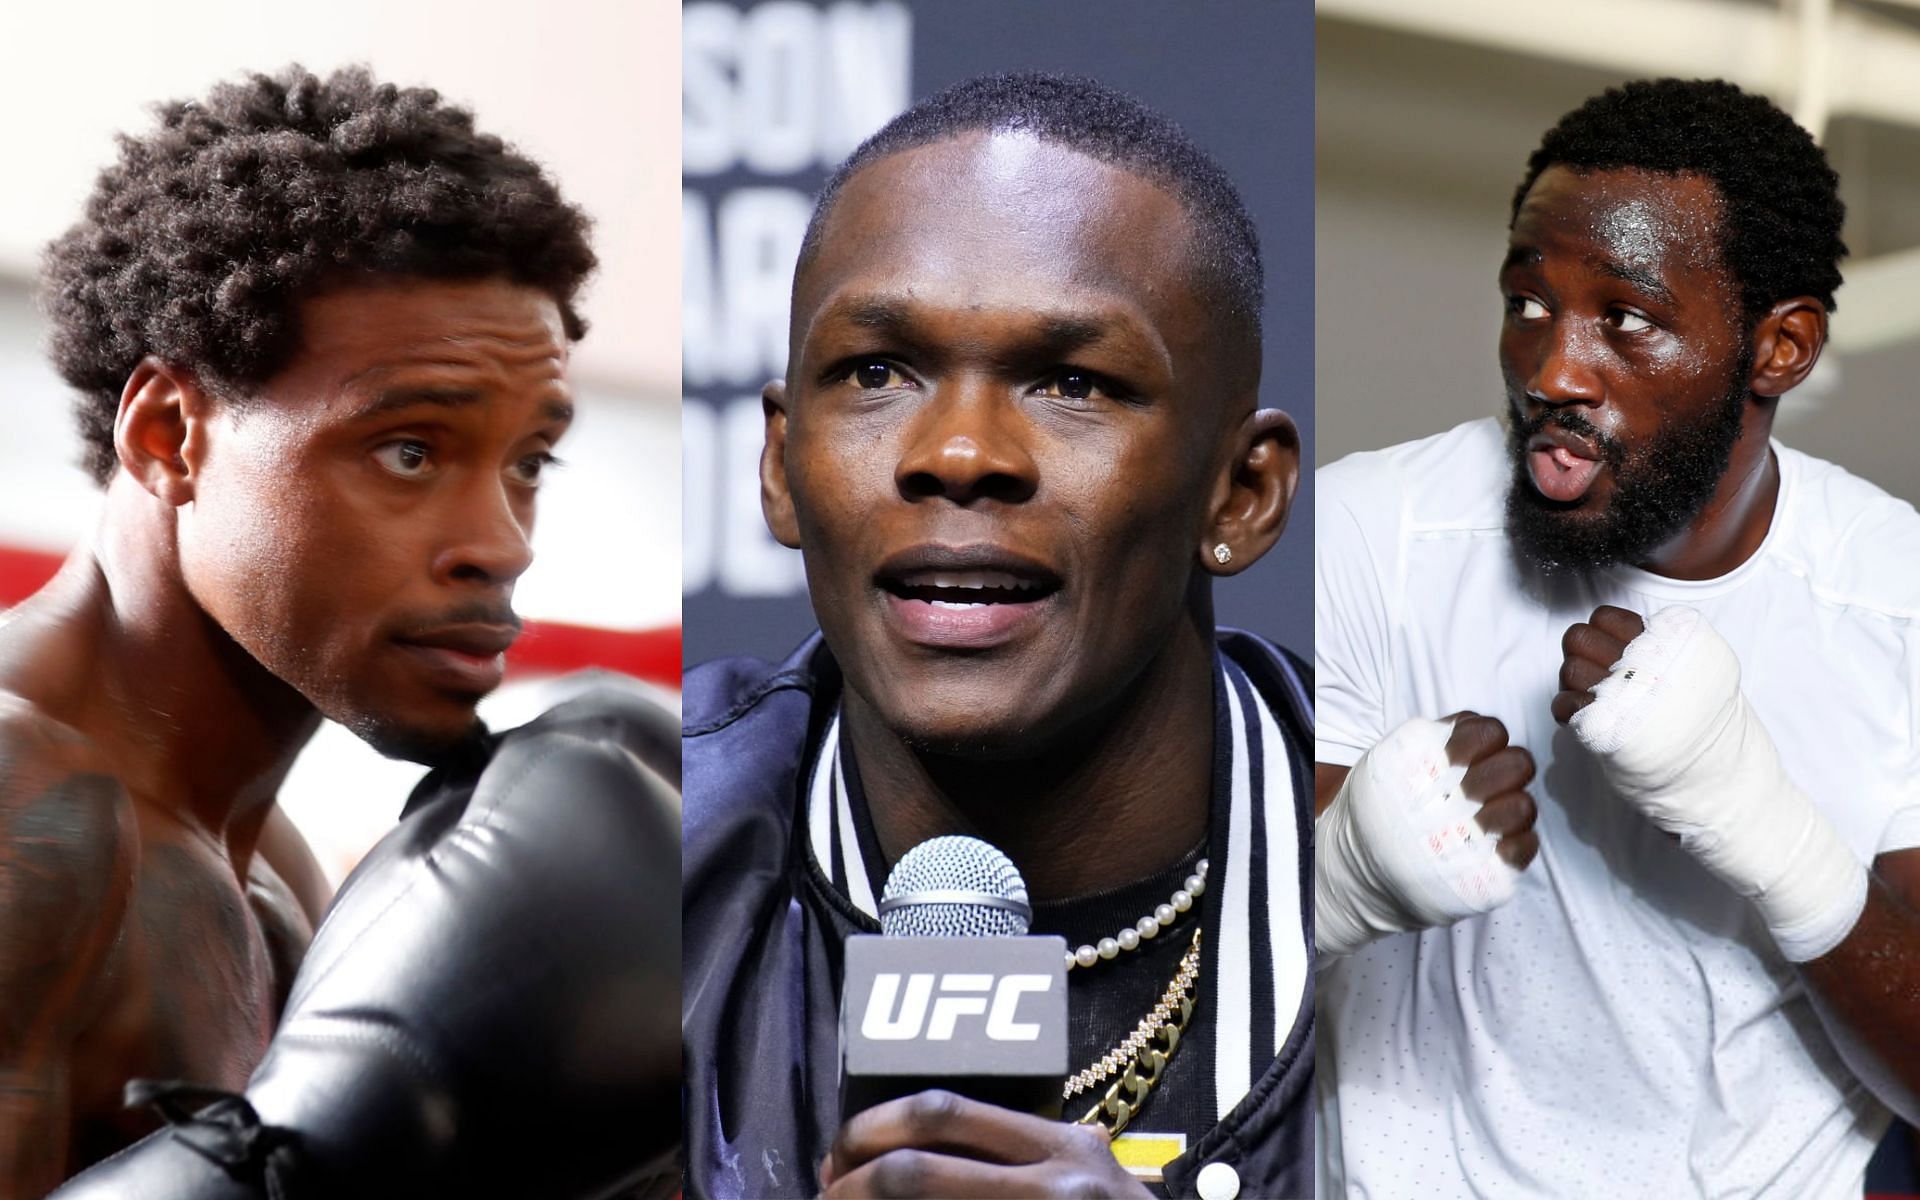 Errol Spence Jr. (left), Israel Adesanya (middle) and Terence Crawford (right) [Images Courtesy: @GettyImages]